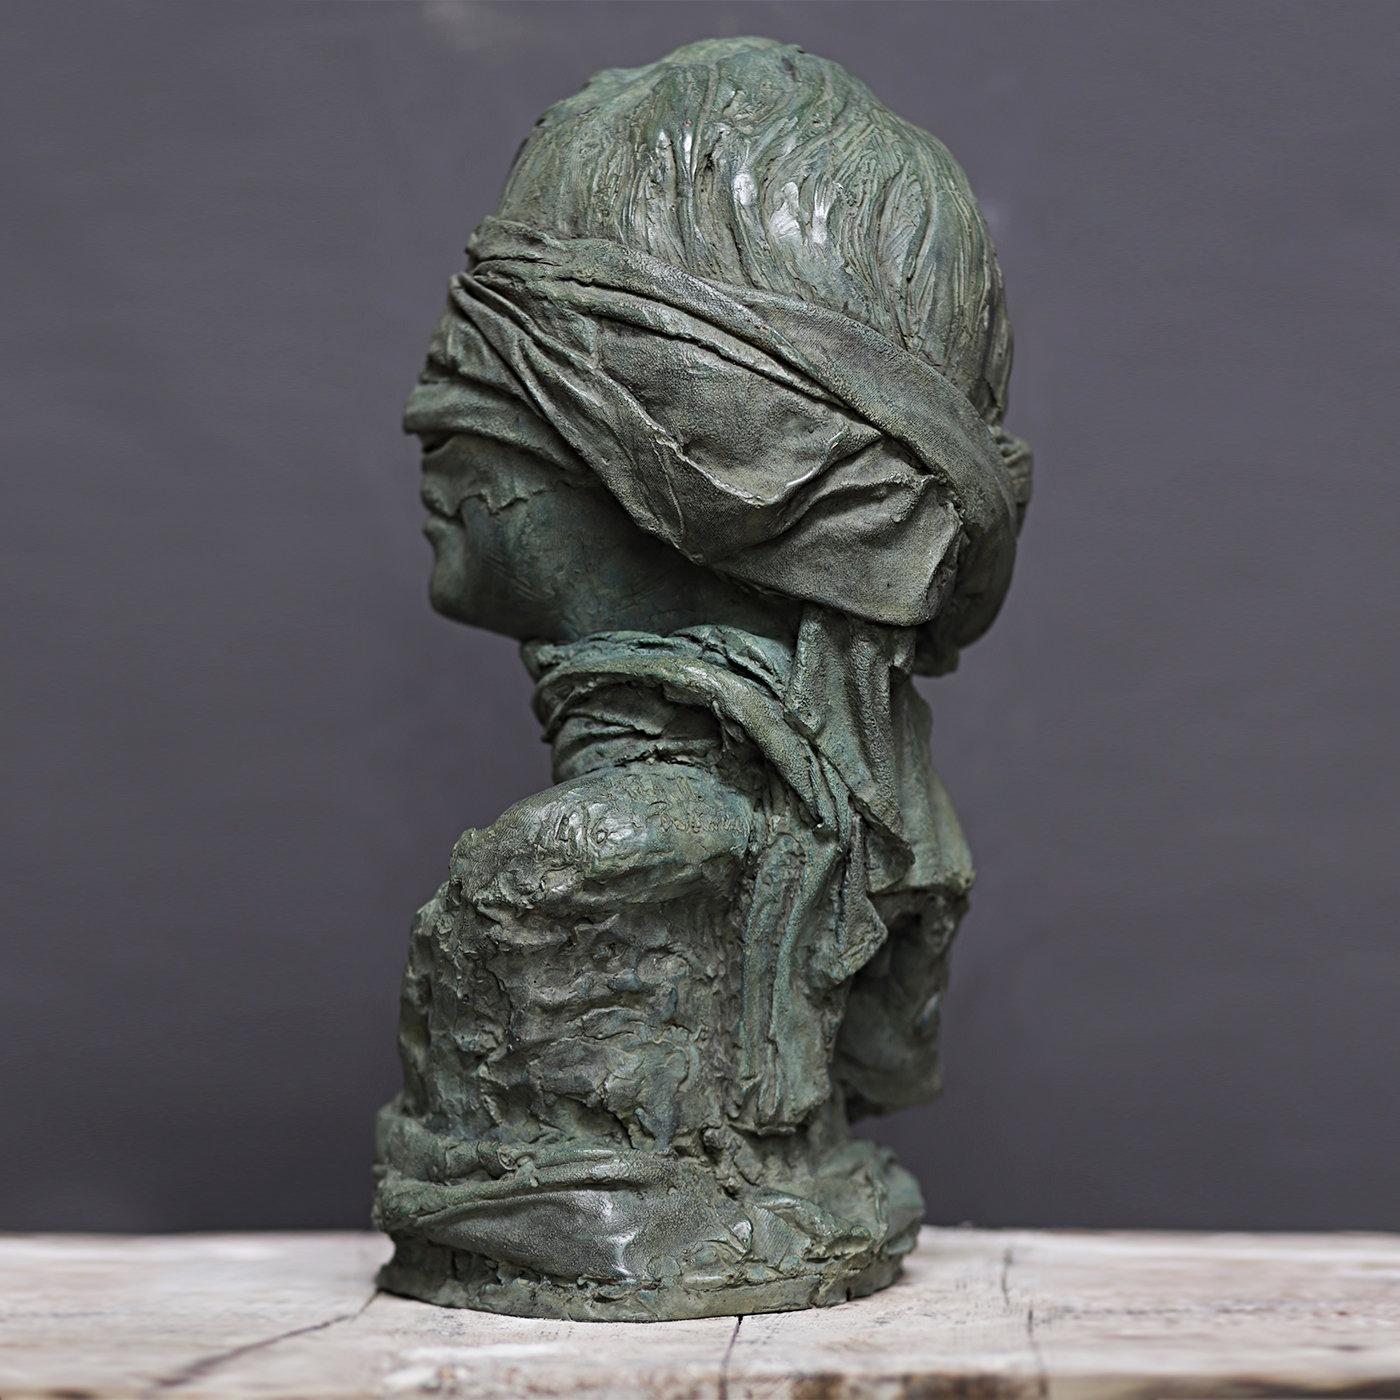 This splendid artwork was handmade by the sculptor Raffaello Romanelli in 2018. It depicts the bust of a woman with blindfolded eyes, the traditional iconography of the Roman Godess, Fortune. This exquisite decorative object boasts a sublime